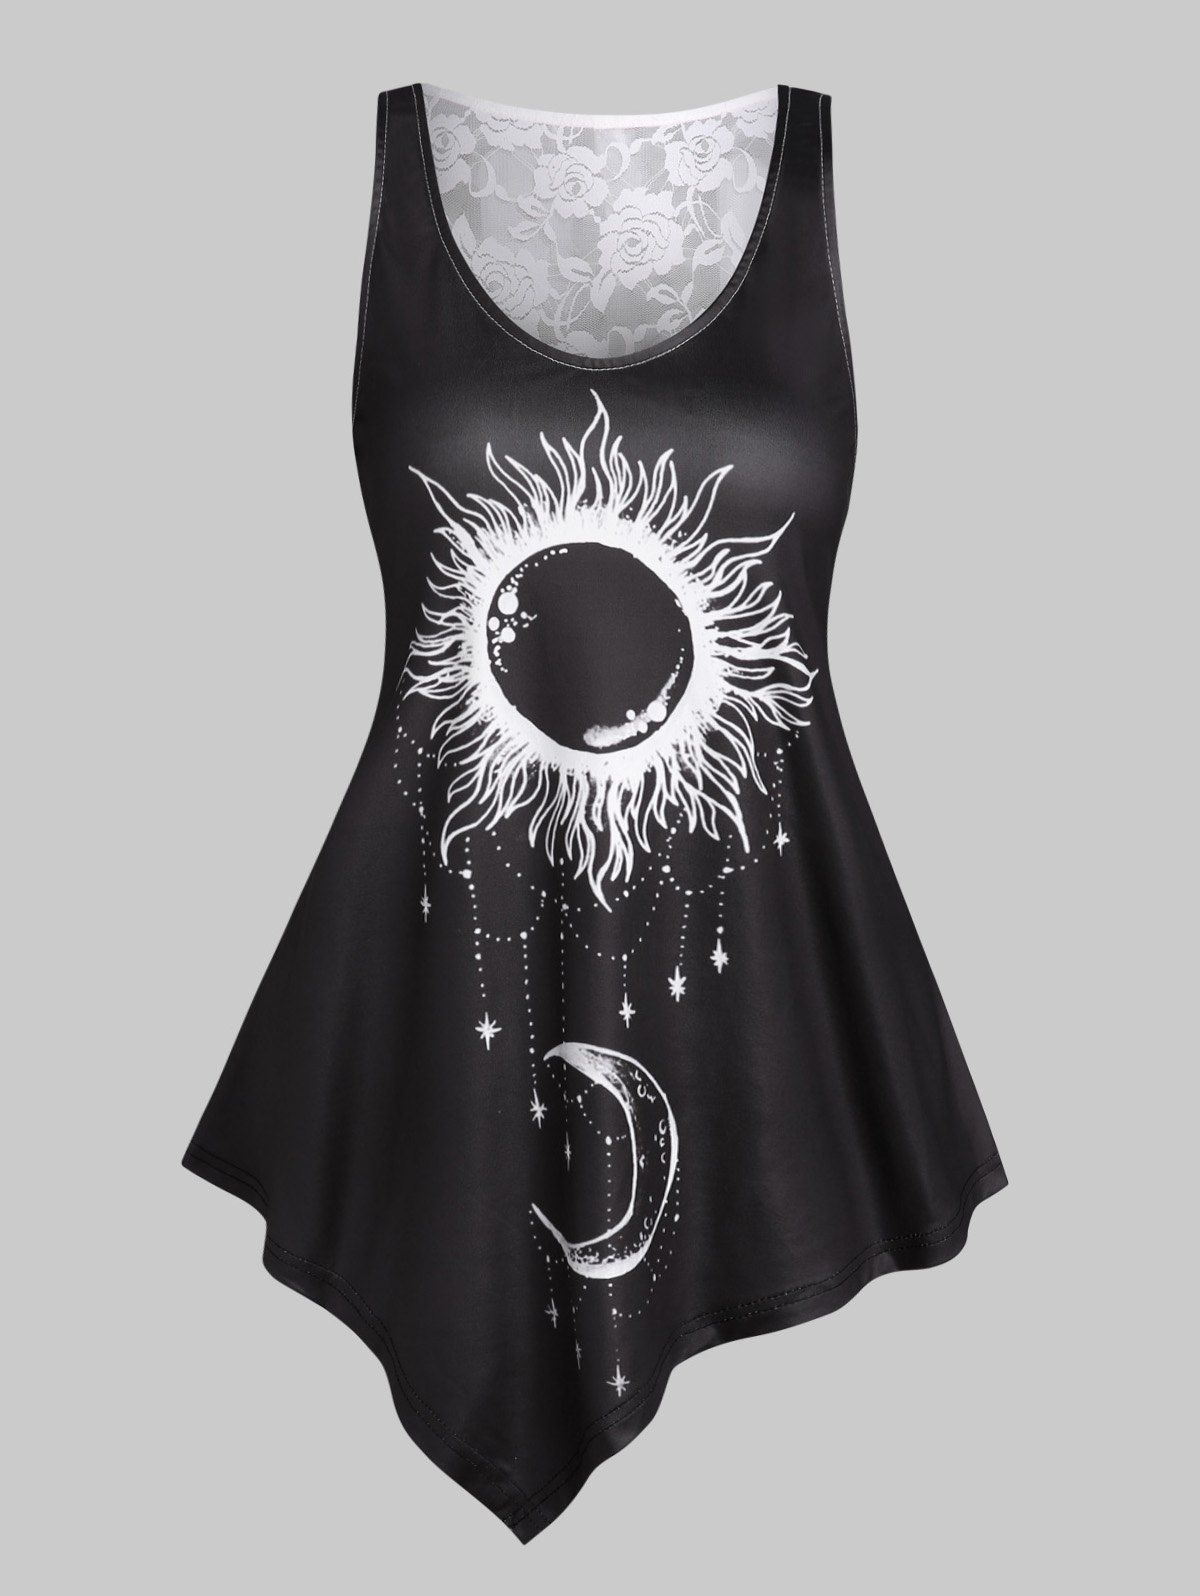 Asymmetrical Lace Sheer Moon and Sun Tank Top - WHITE M